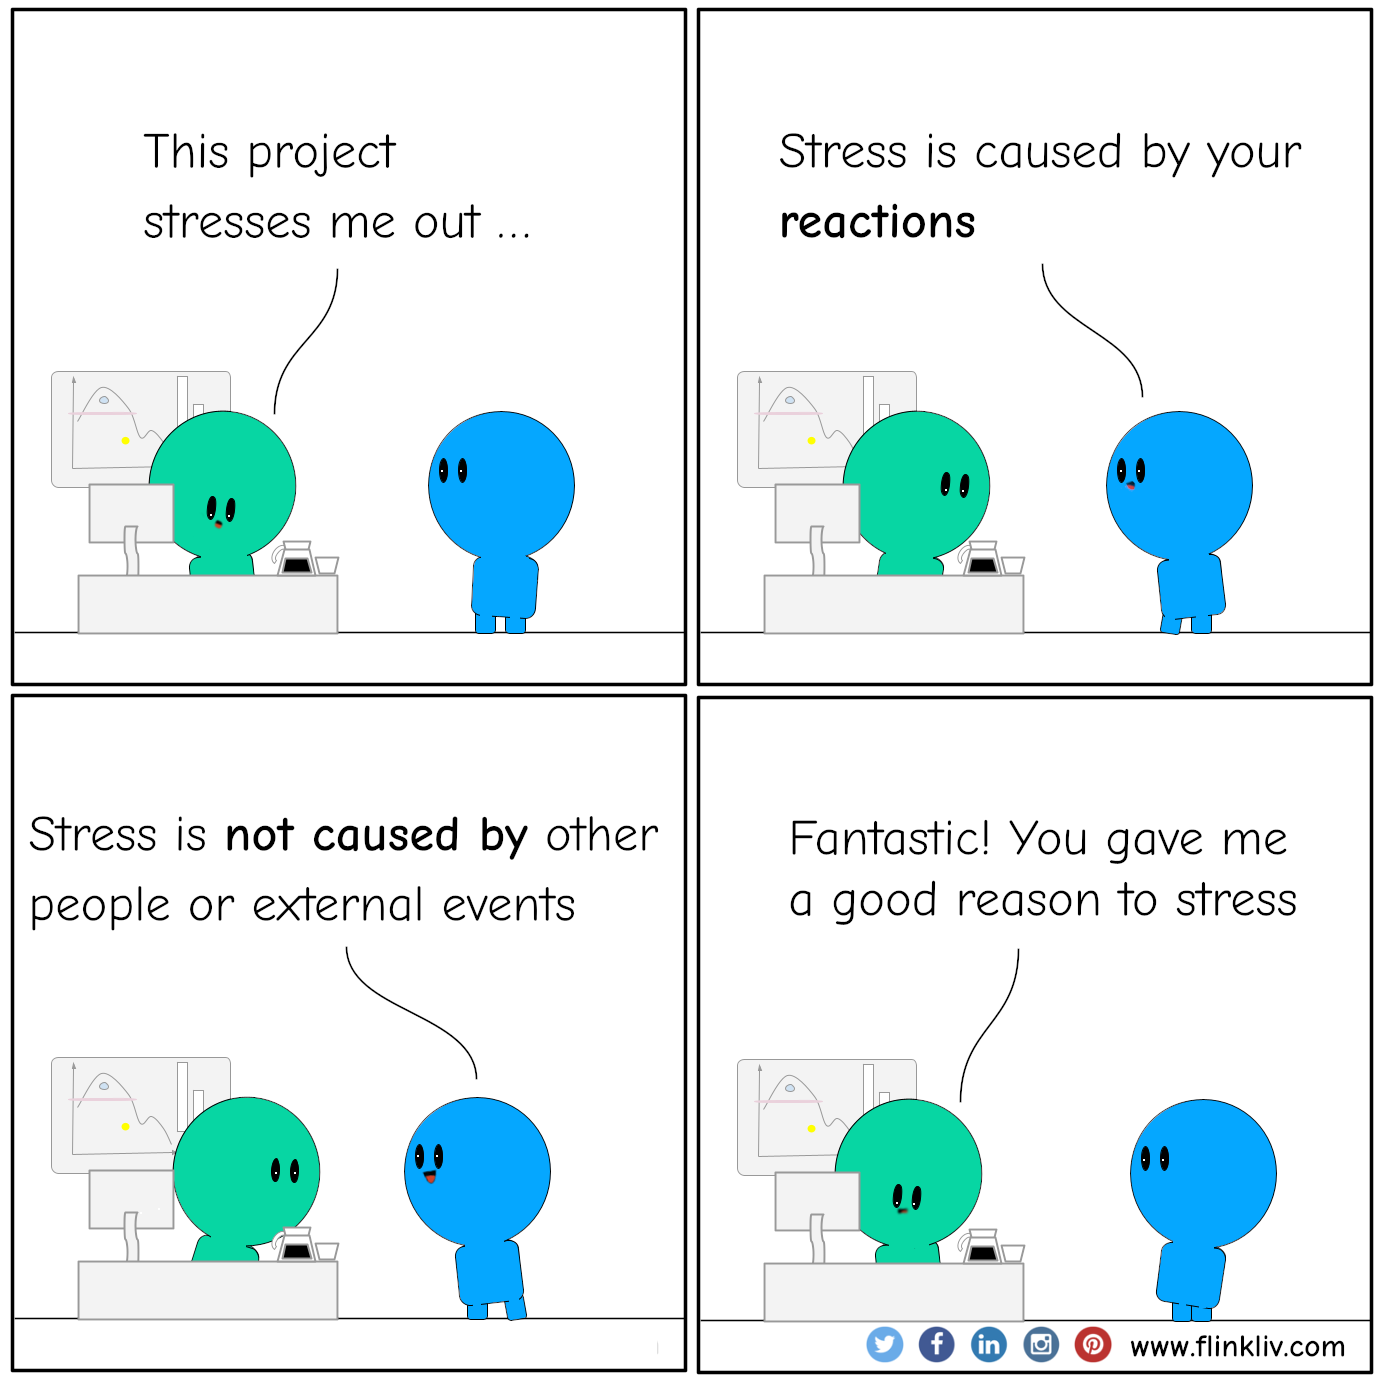 Conversation between A and B about stress at work
				A: This project is stressing me out
				B: Stress is caused by your reaction, not other people or external events.
			